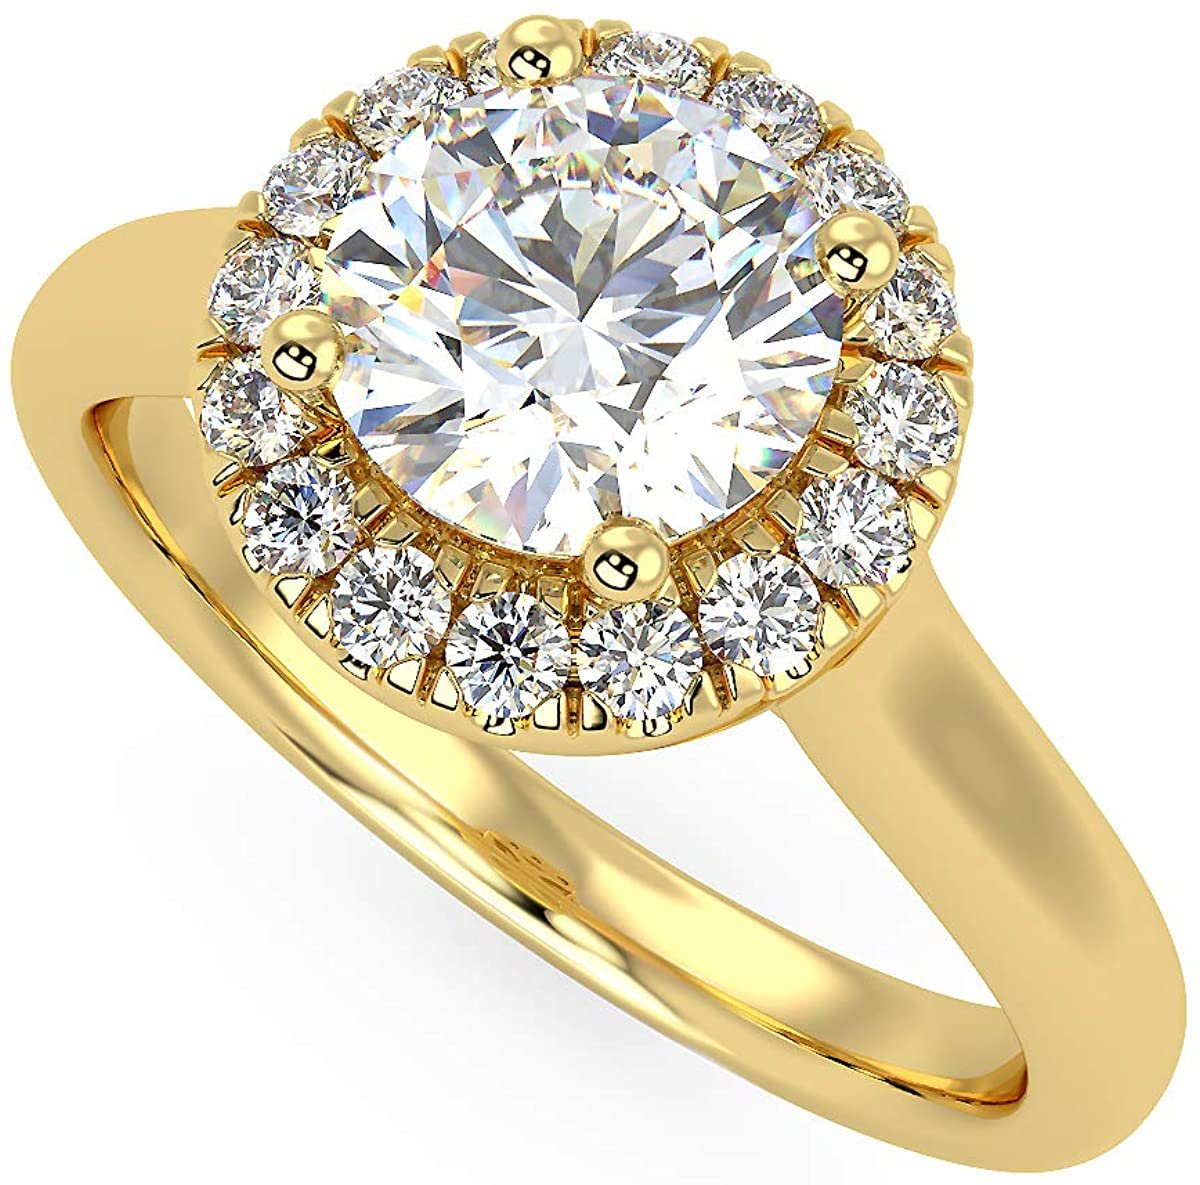 IGI Certified 14K Yellow Gold 1.0 Cttw Brilliant-Cut Lab Created Diamond Round Halo Engagement Ring (Center Stone: G-H Color, VS1-VS2 Clarity) - Size 5